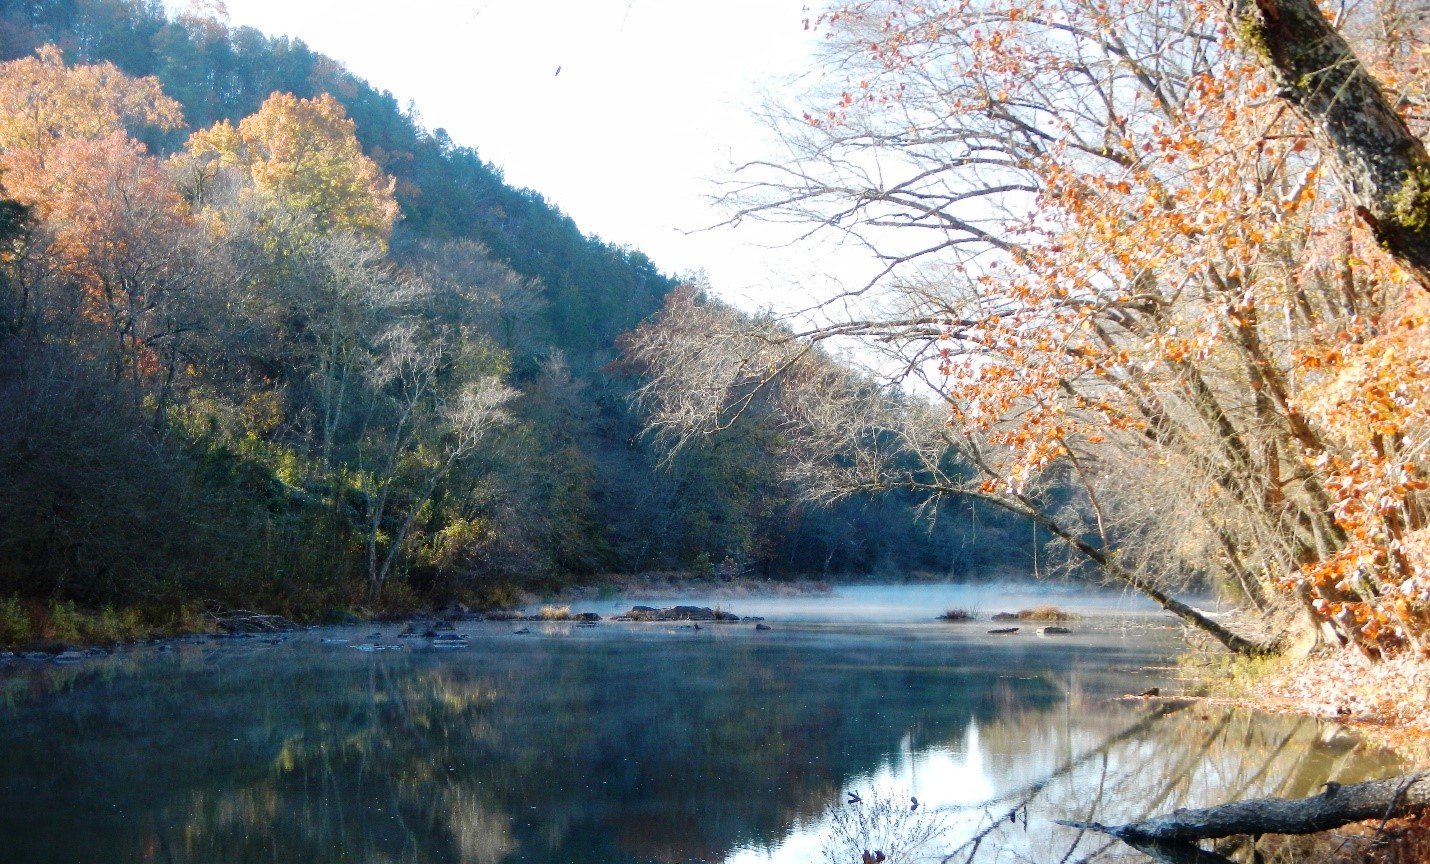 Image of the Cossatot River